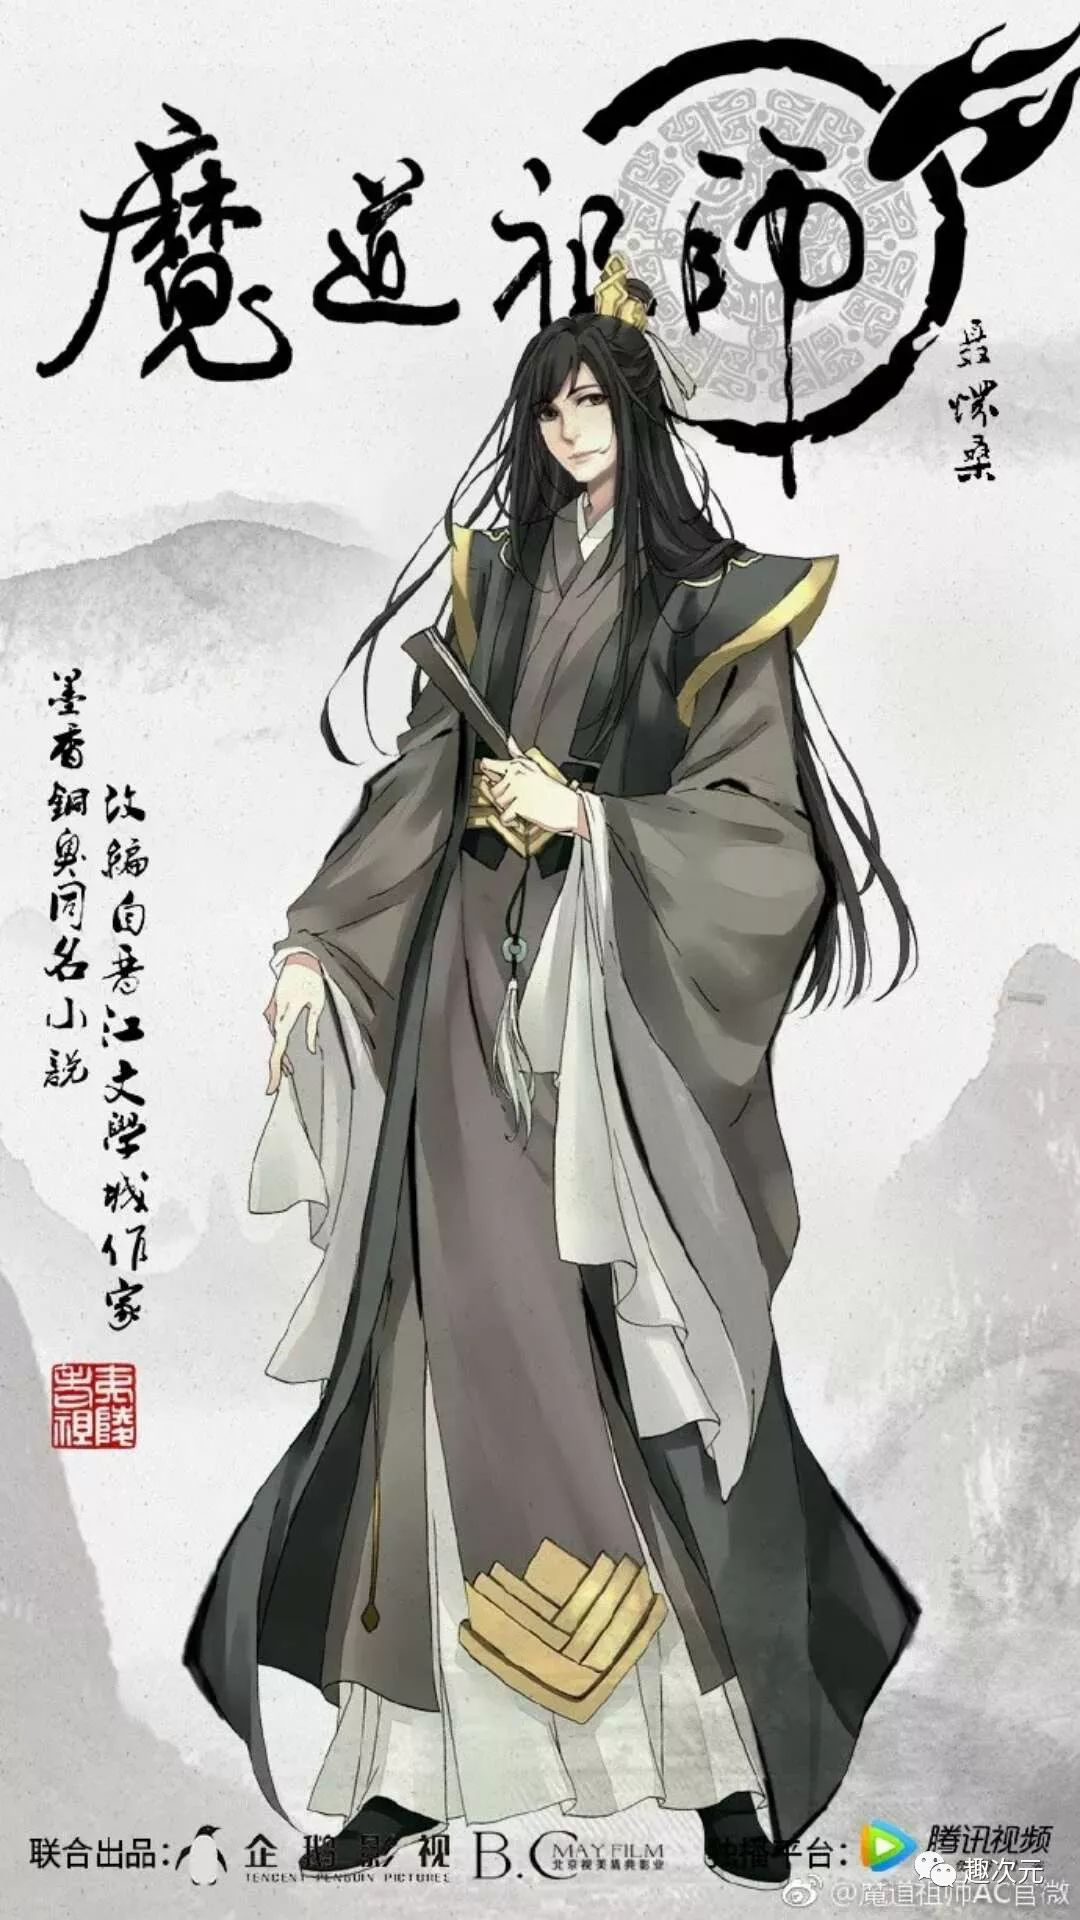 Nie Huaisang/Gallery | Grandmaster of Demonic Cultivation - Founder of